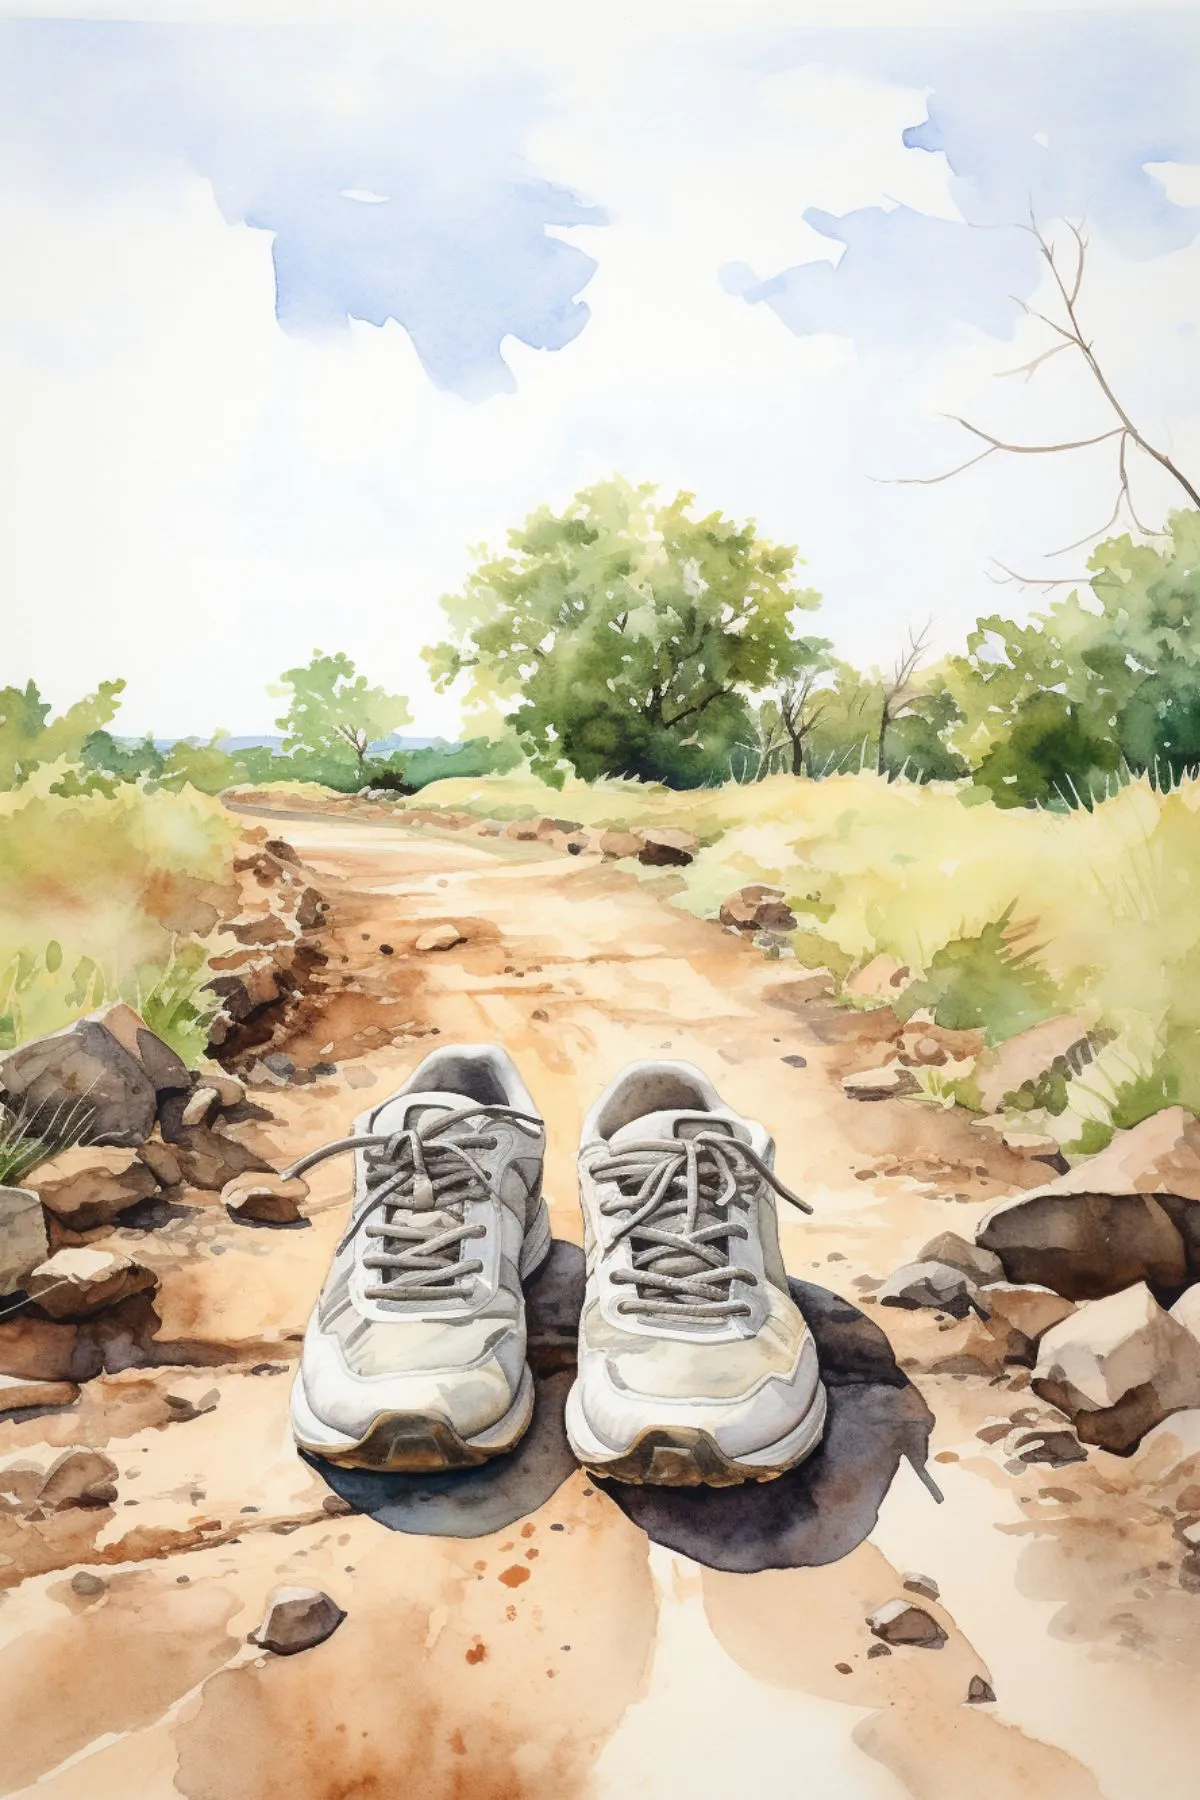 Cover image for prayers for athletes post - features a pair of sneakers on a dirt road